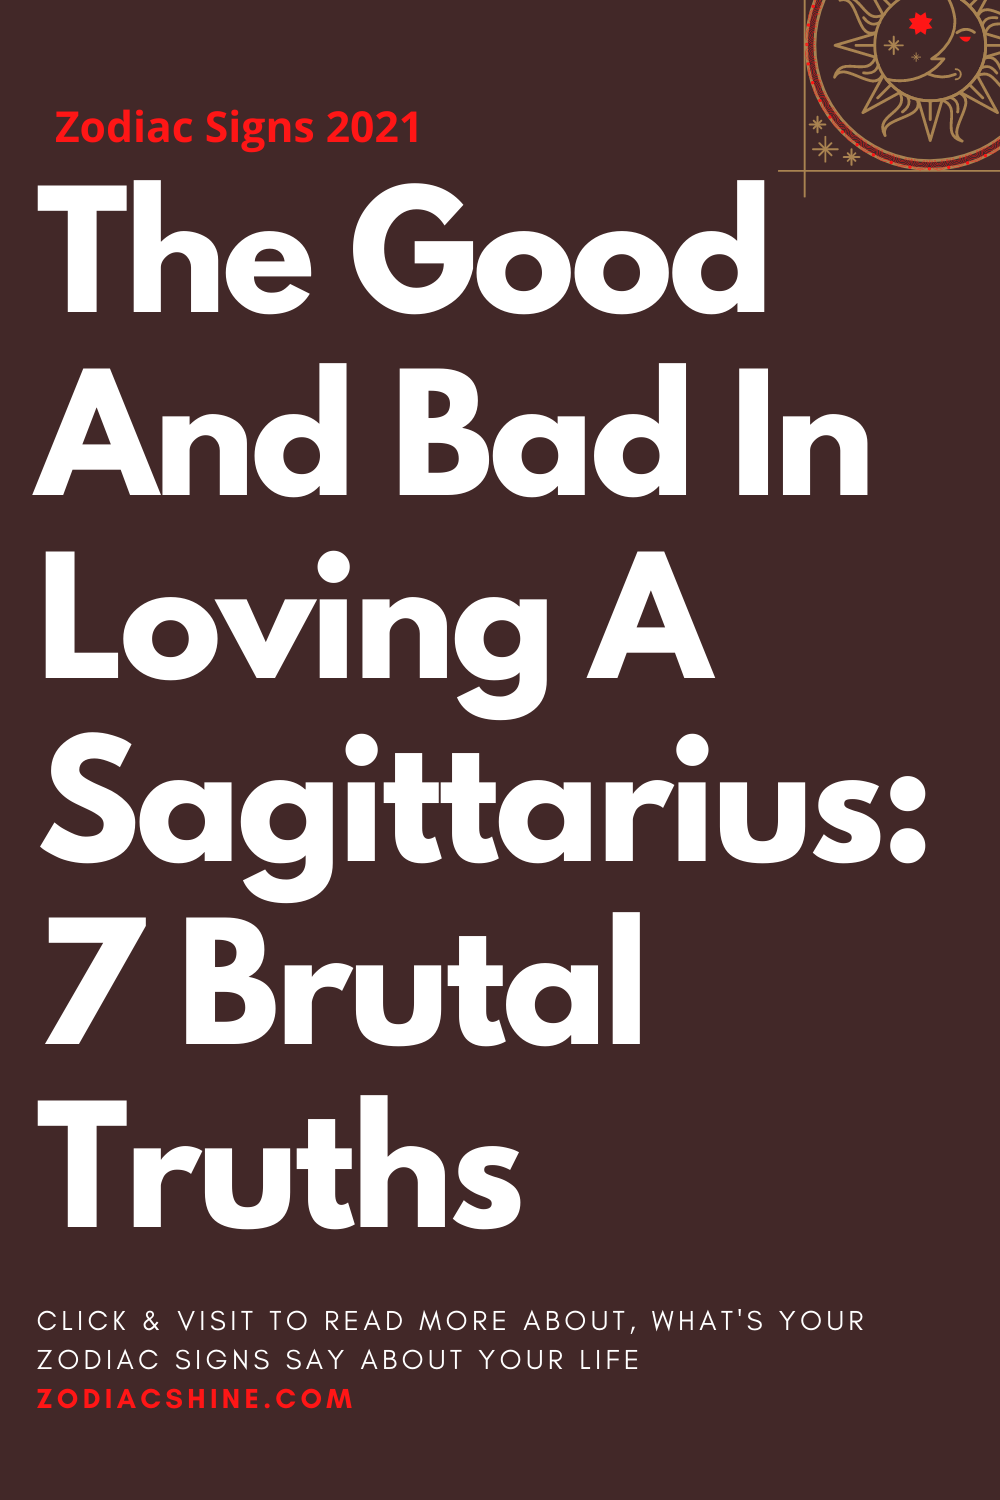 The Good And Bad In Loving A Sagittarius: 7 Brutal Truths